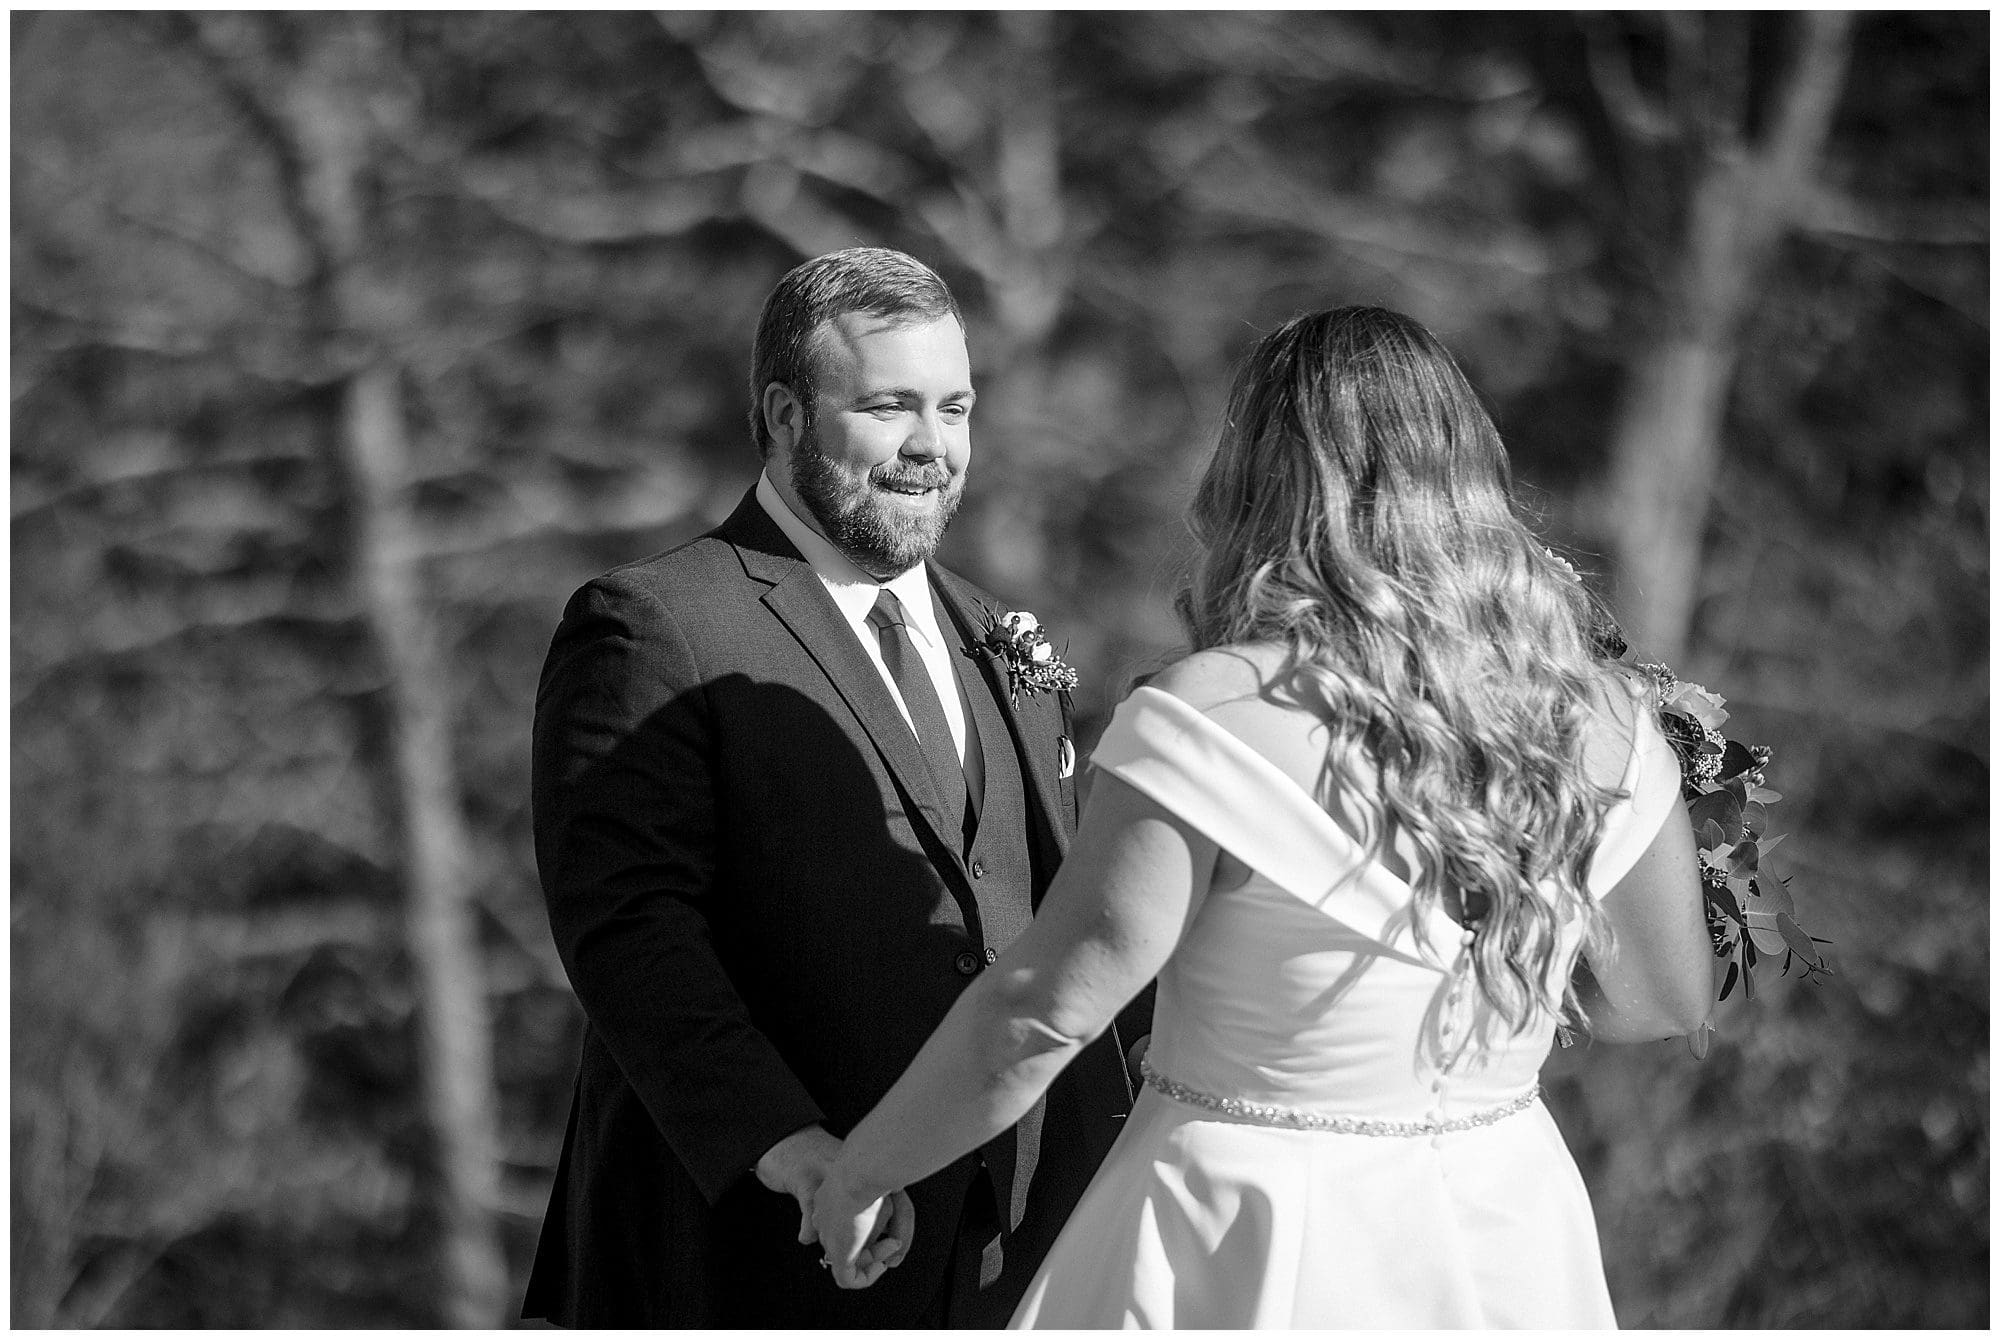 Black and white photo of a bride and groom in the woods.